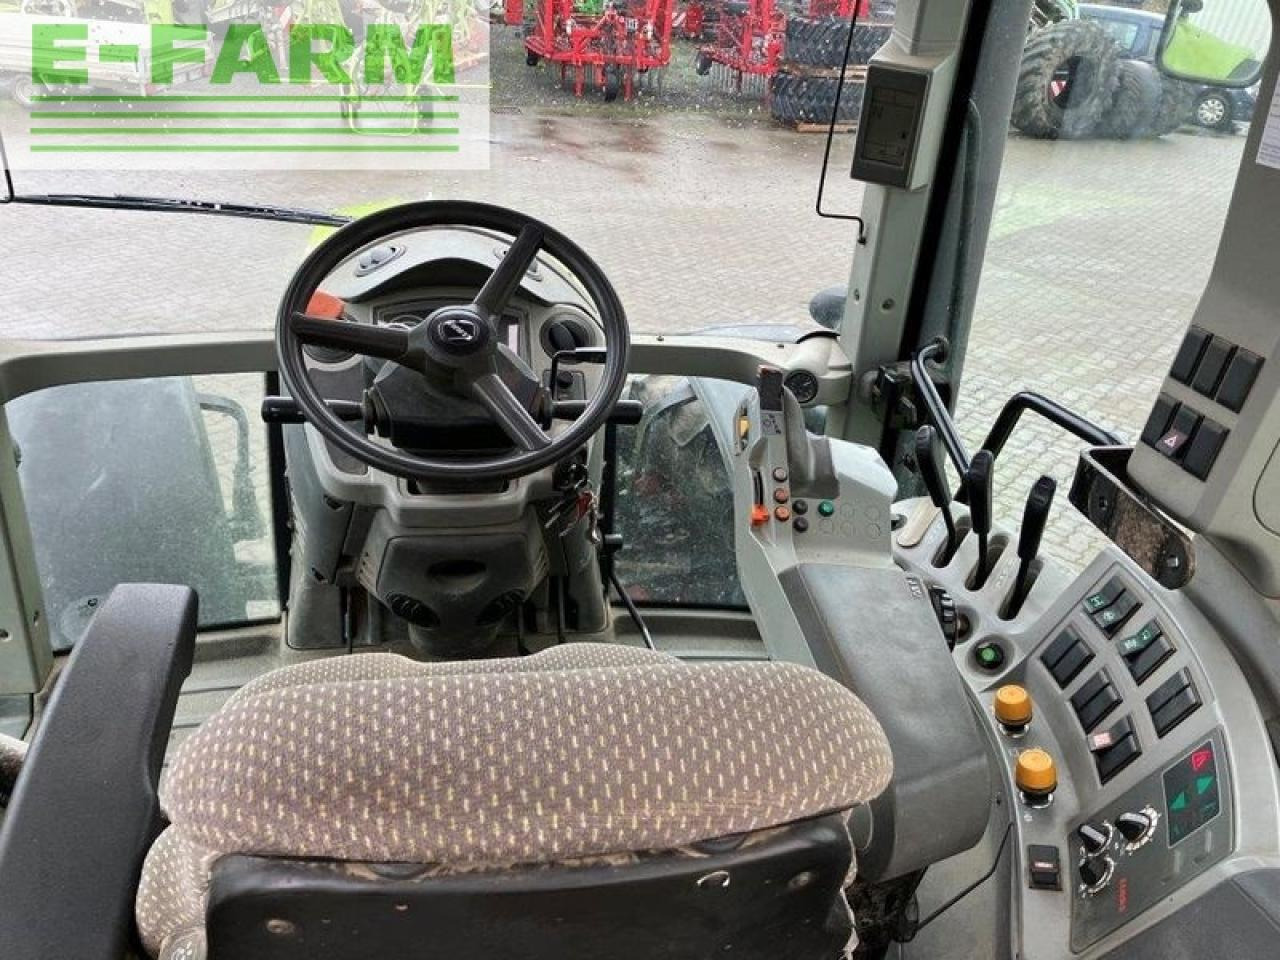 Tracteur agricole CLAAS arion 640 cis